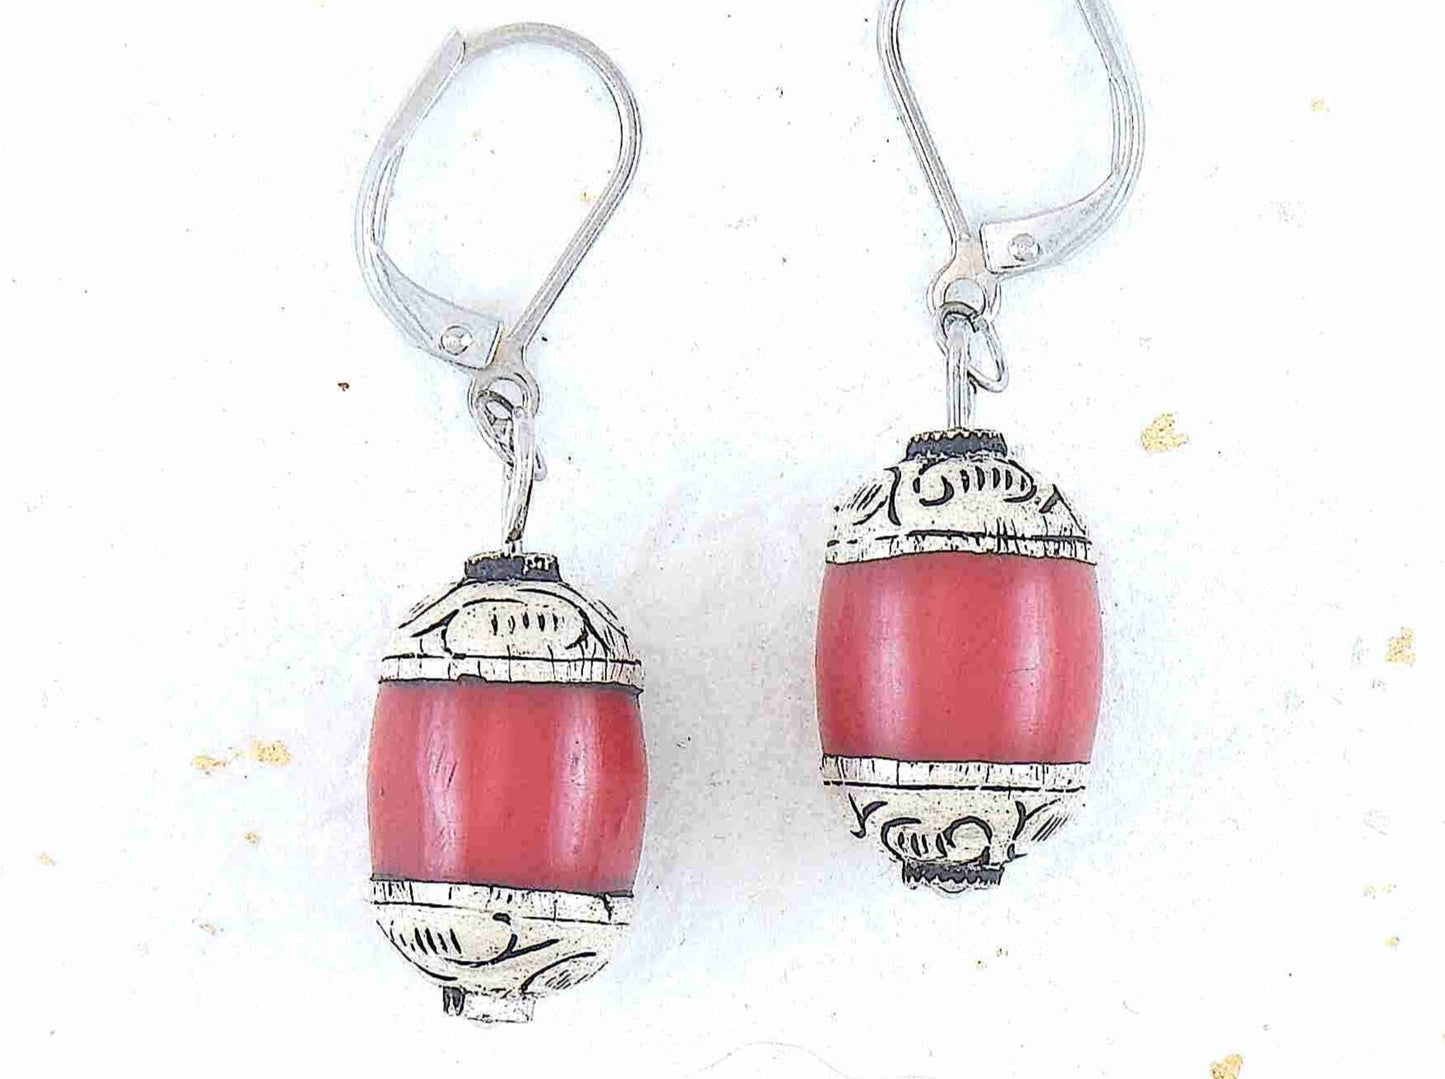 Short earrings with red resin and pewter Tibetan cylinders, sculpted caps, stainless steel lever back hooks